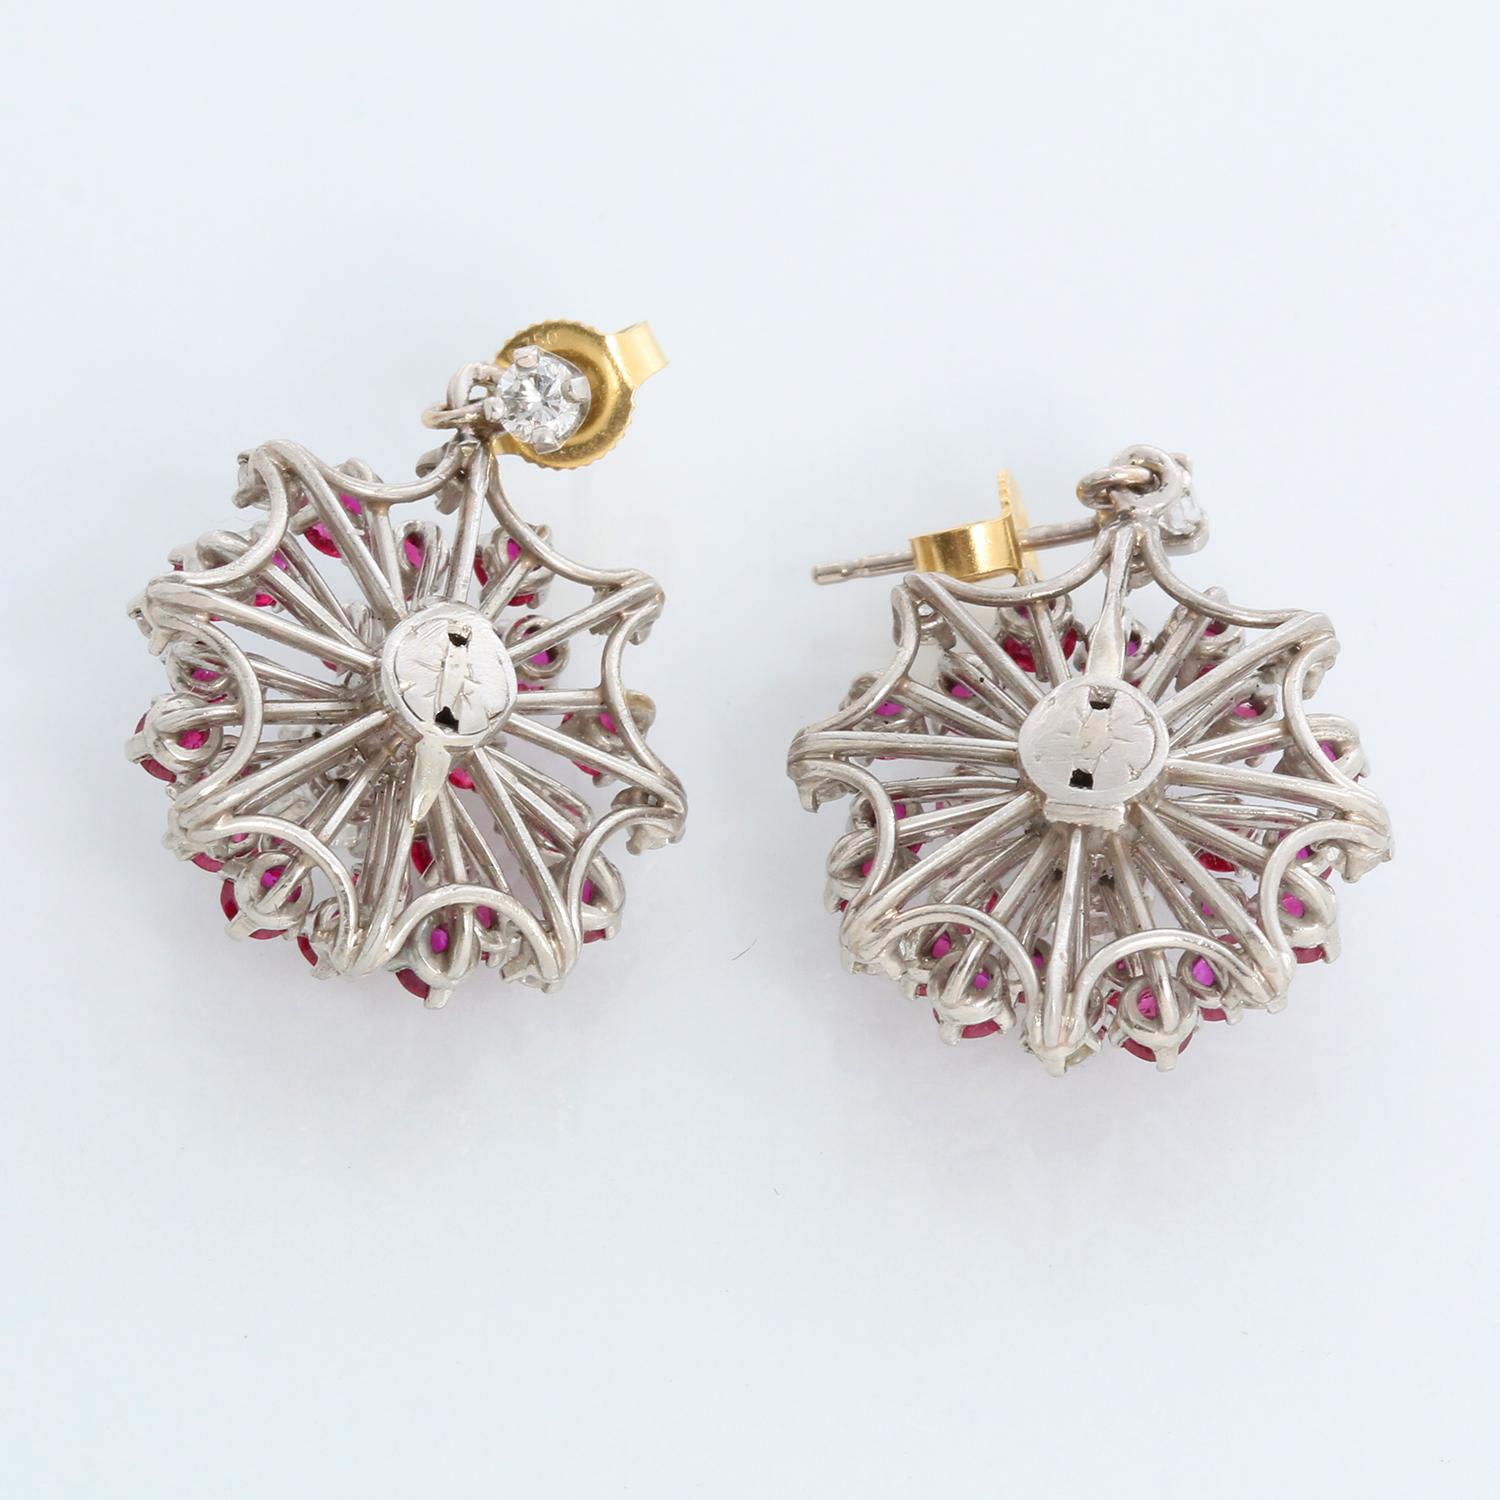 Vintage 14k White Gold Ruby & Diamond Earrings 3.5 Carat In Excellent Condition For Sale In Dallas, TX